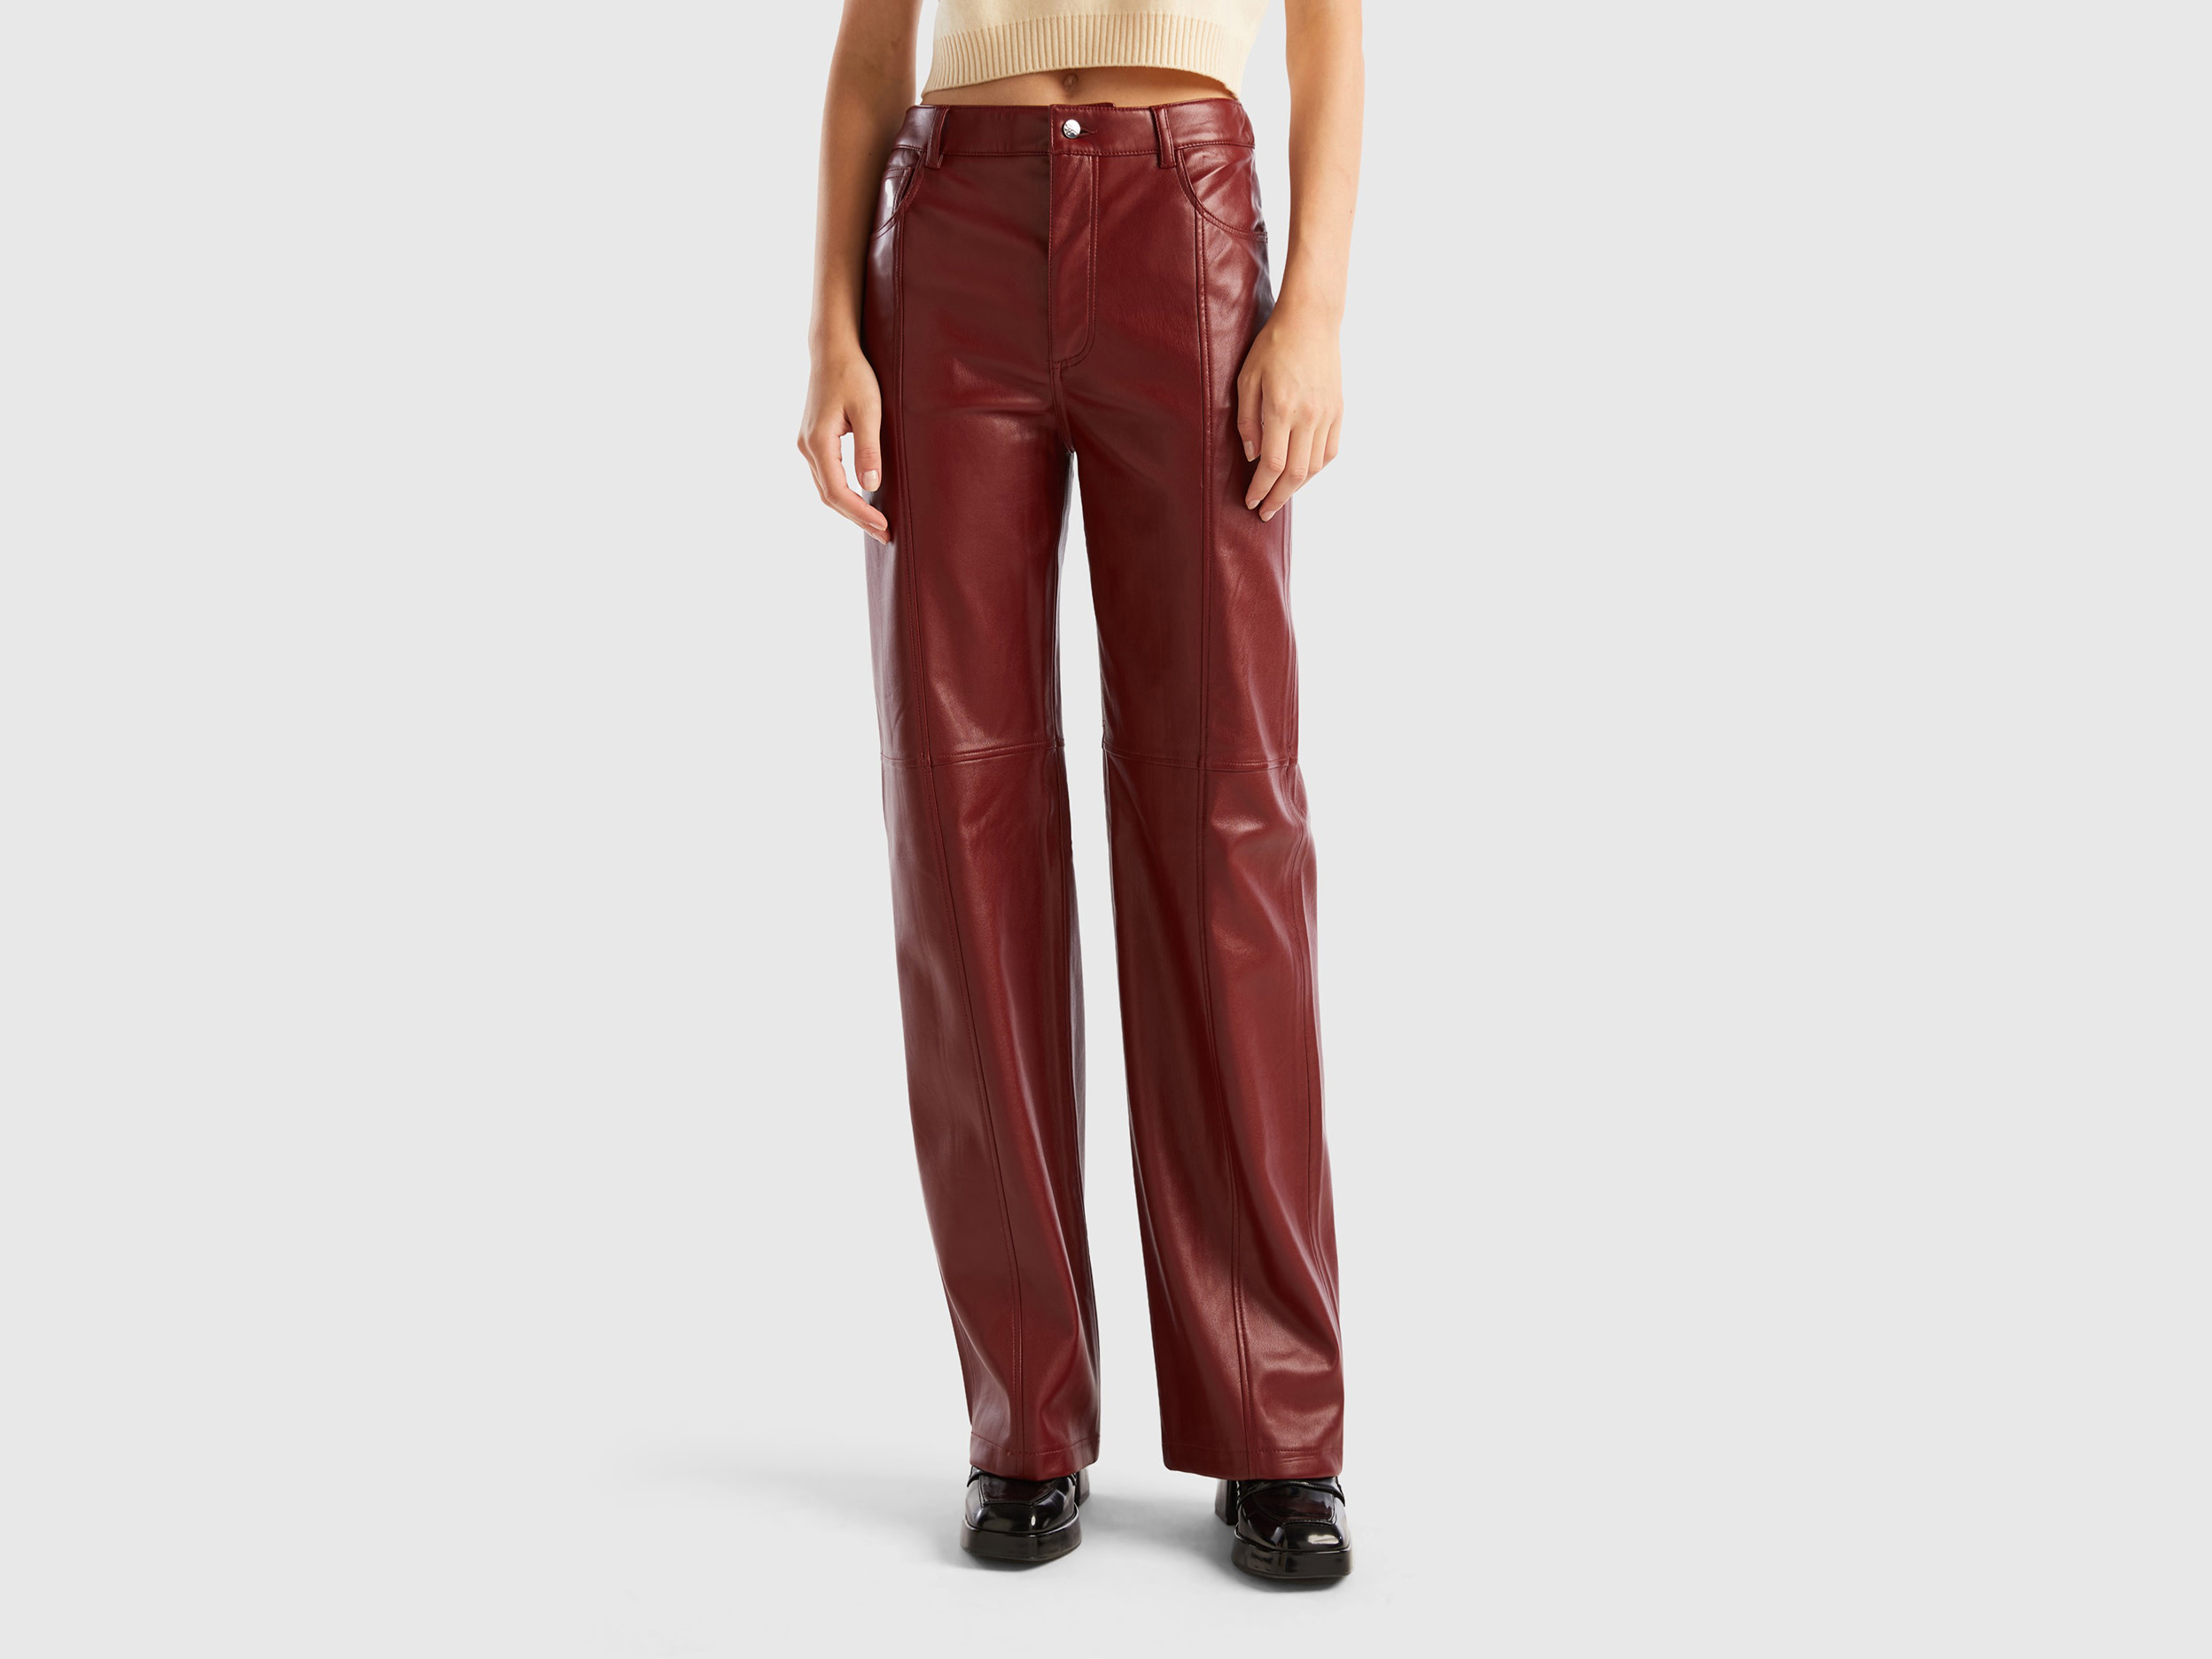 Benetton, Trousers In Imitation Leather Fabric, size 14, Burgundy, Women